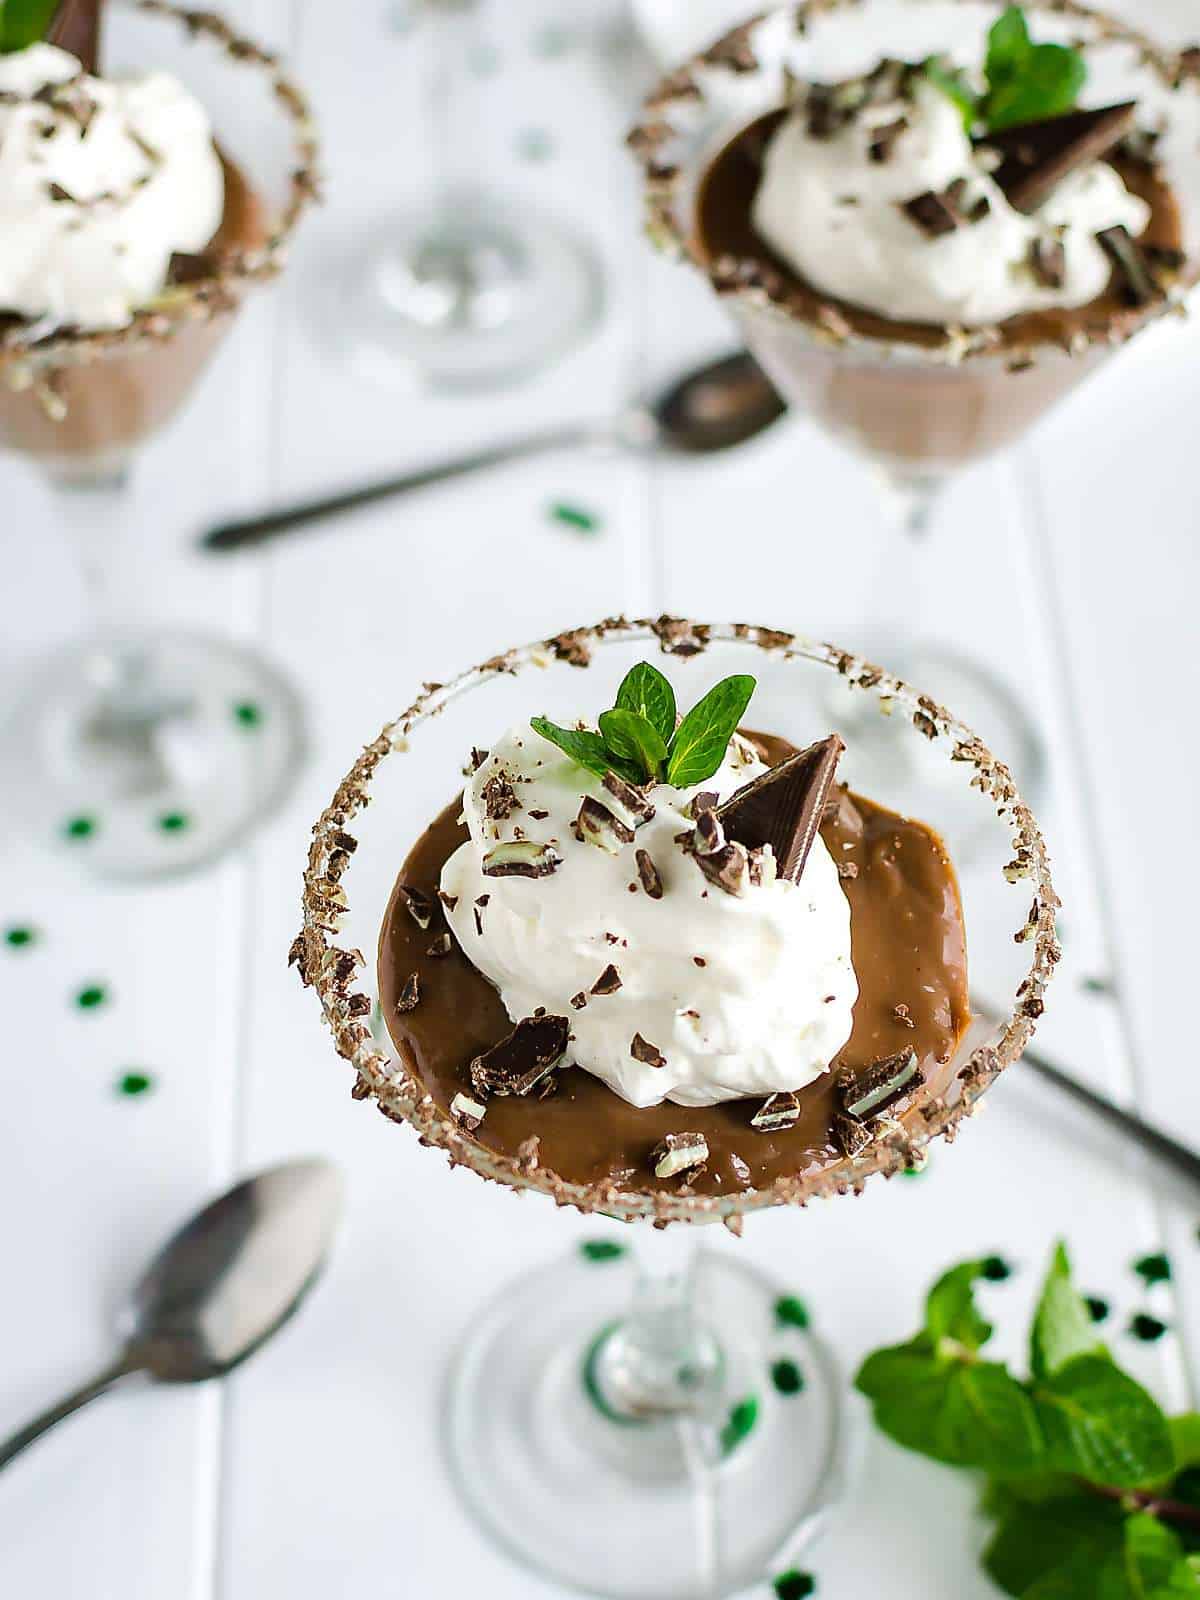 homemade chocolate pudding with whipped cream and crushed Ande's mints in a chocolate rimmed glass.